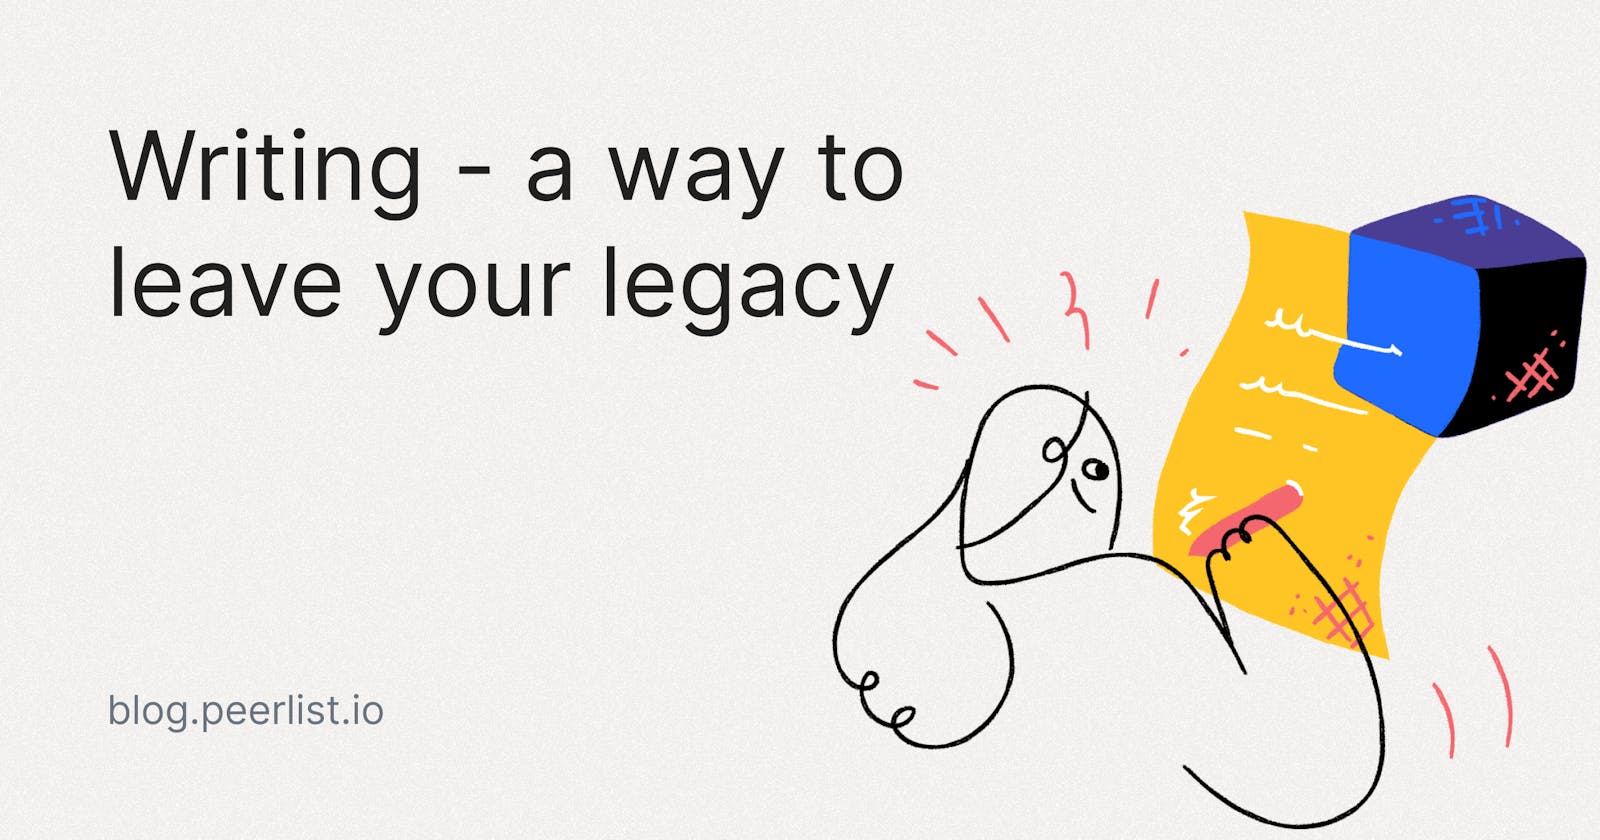 Writing - a way to leave your legacy?